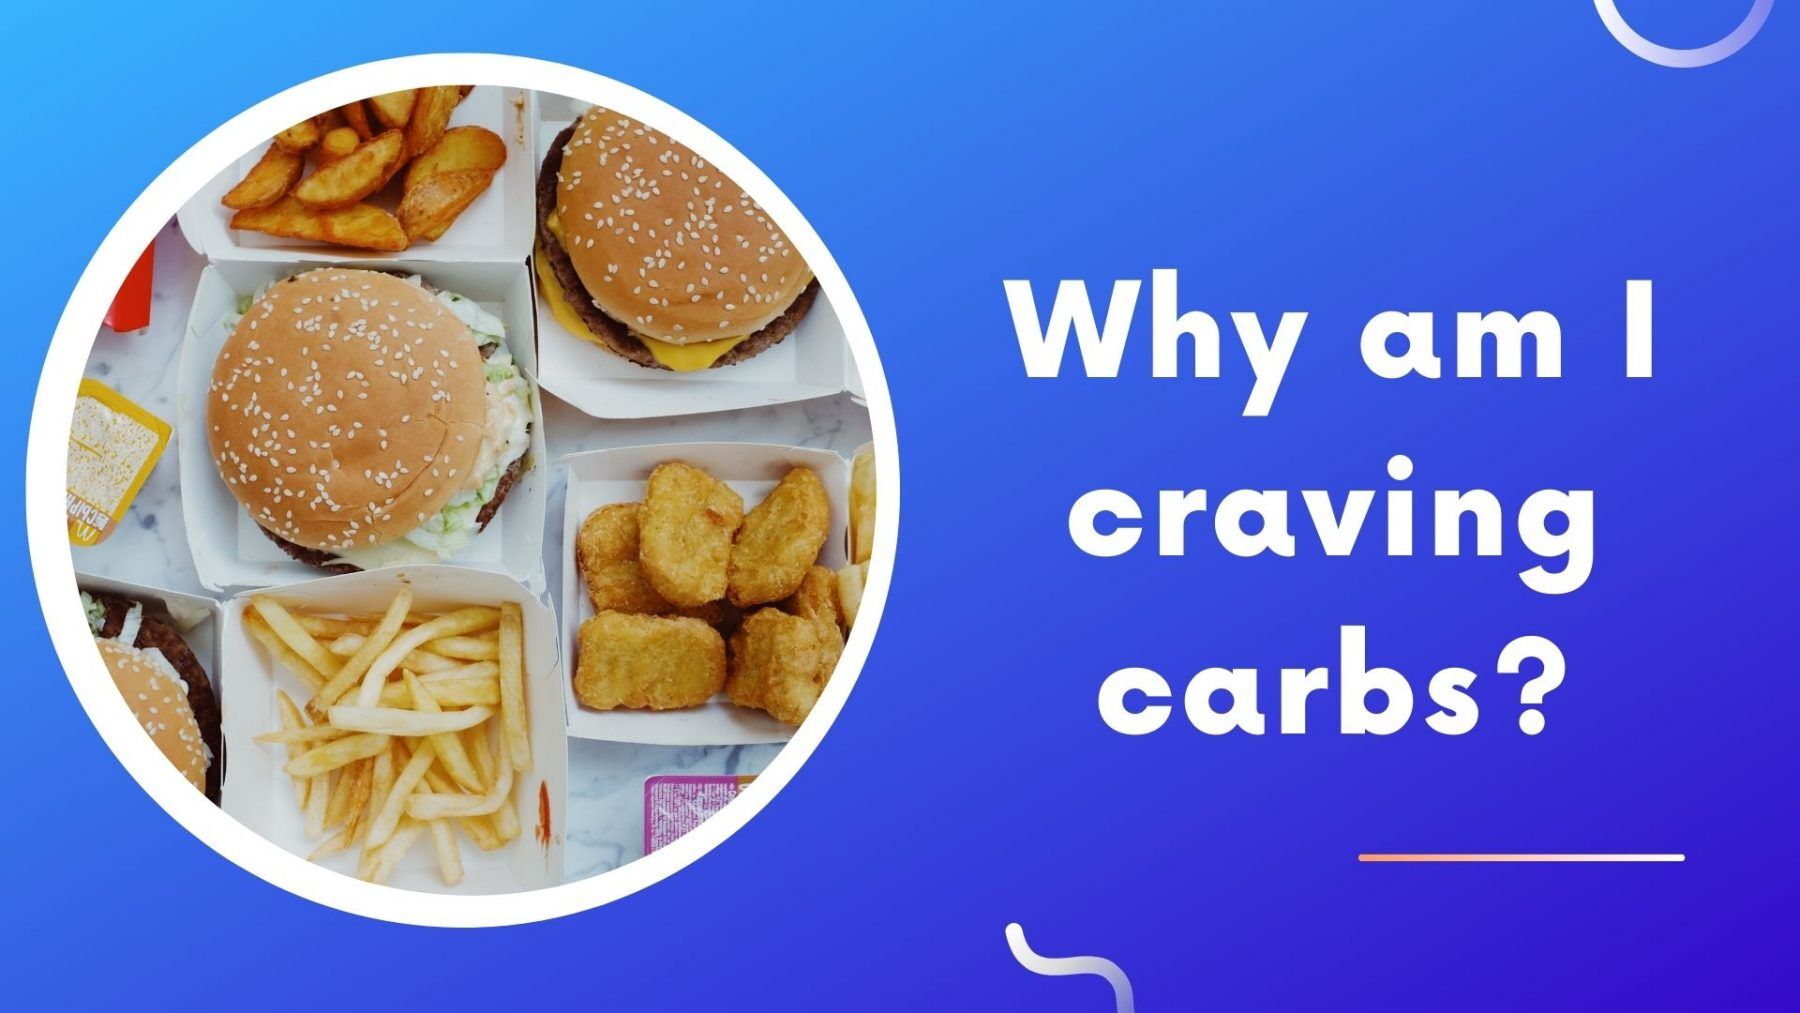 Why am I craving carbs